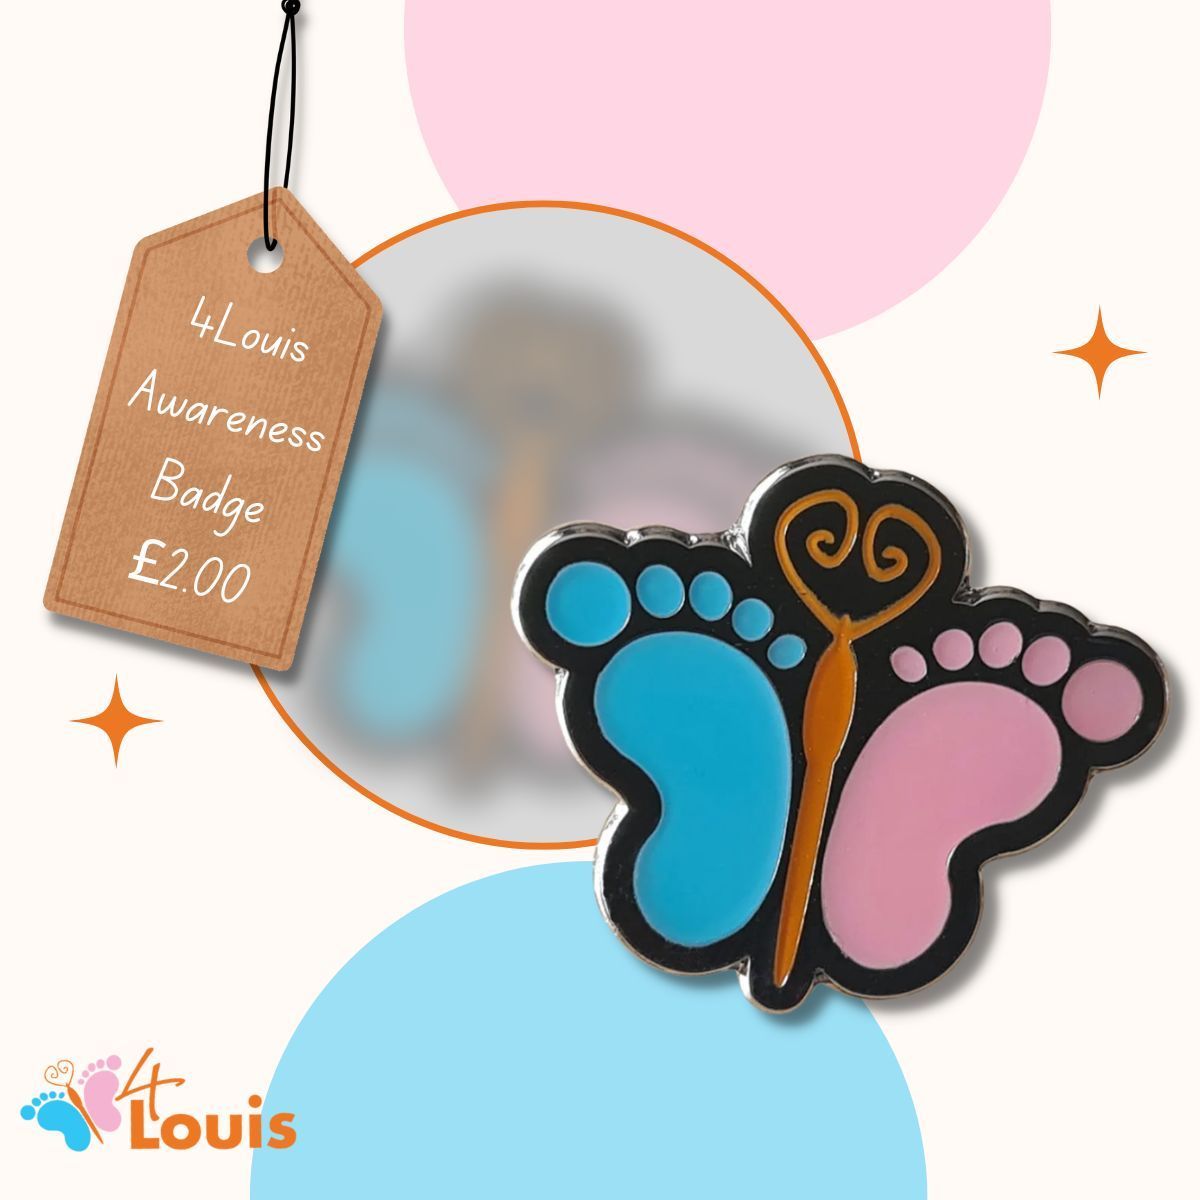 The 4Louis enamel pin badge supports families affected by child loss. Proceeds from every badge sold go towards 4Louis projects and families. Get your 4Louis enamel pin badge today to show support and make a difference. Order here: buff.ly/3R8srei